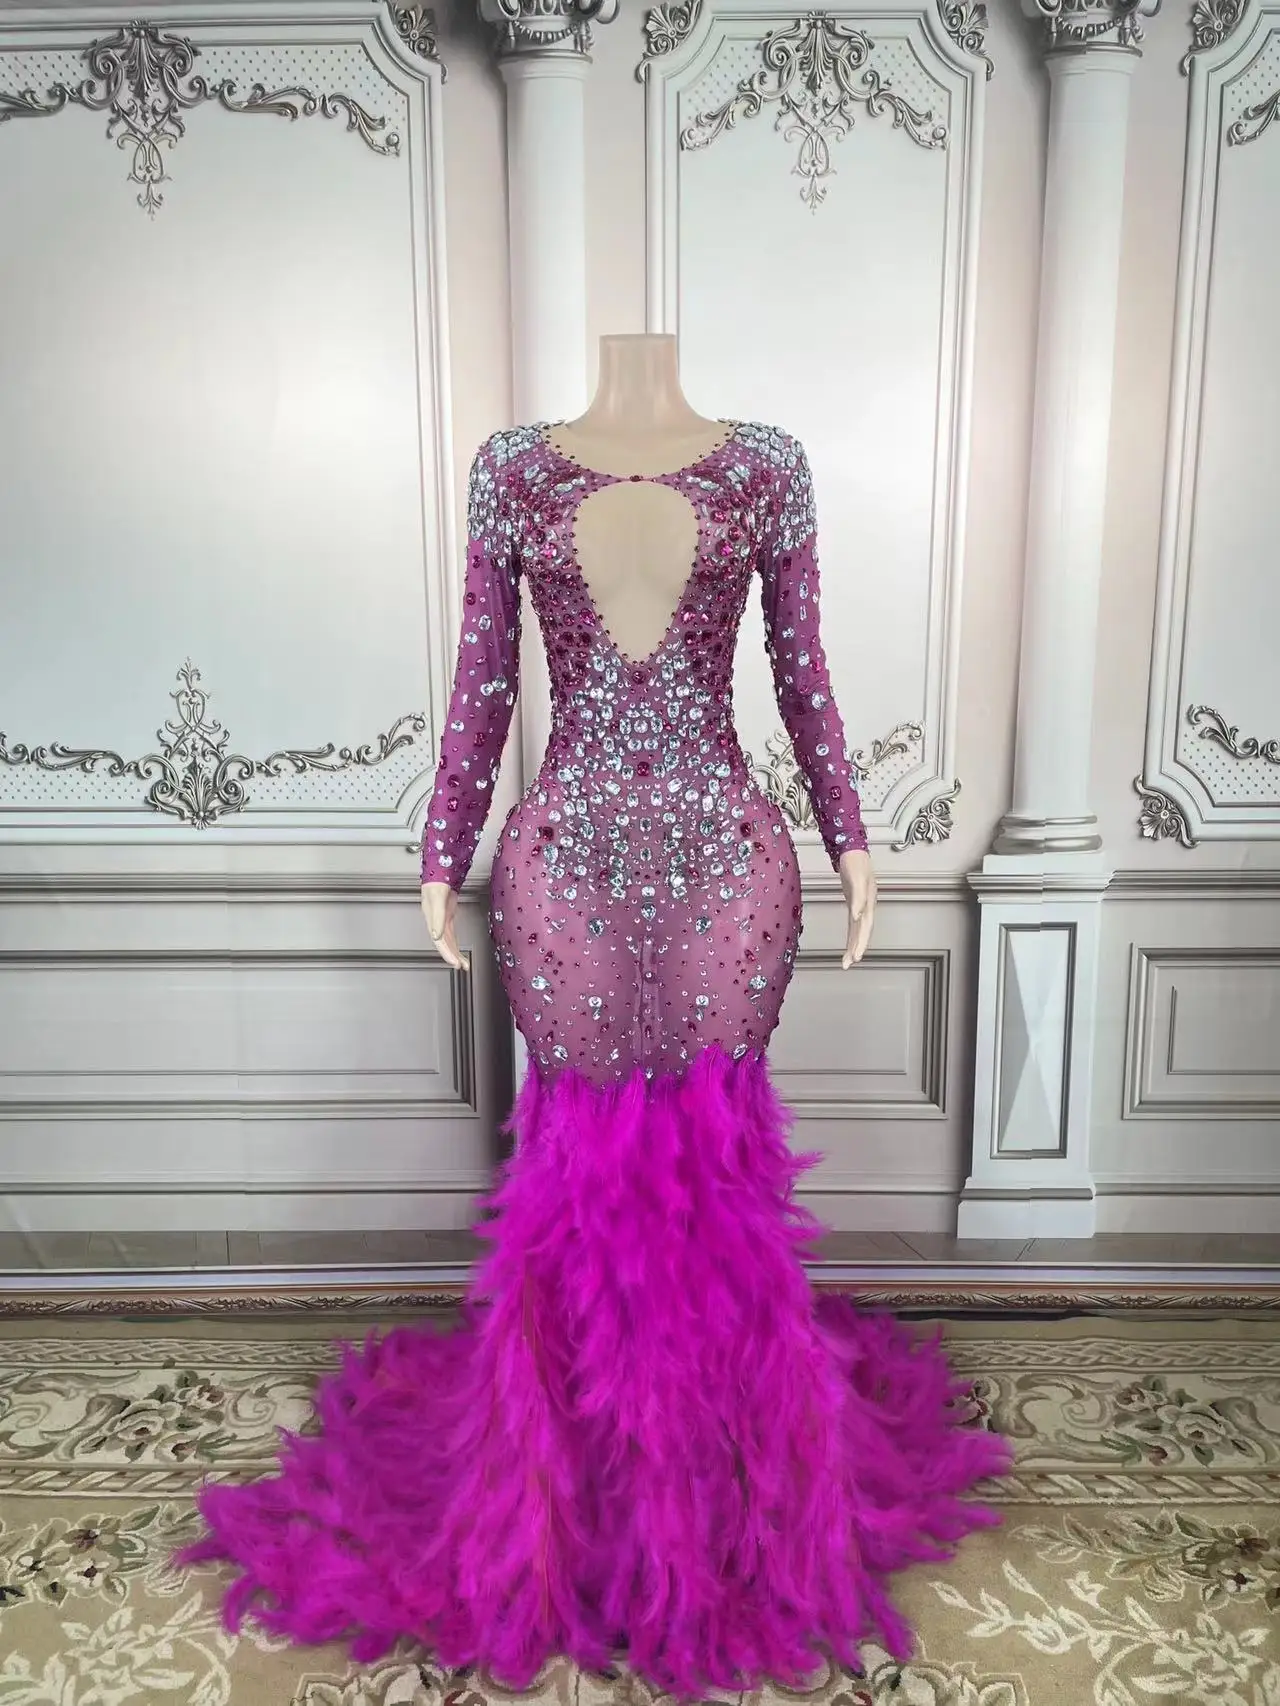 Sexy Transparent Celebrate Evening Prom Gown Birthday Dress for Women Sparkly Rhinestones Feather Dress Festival Outfit